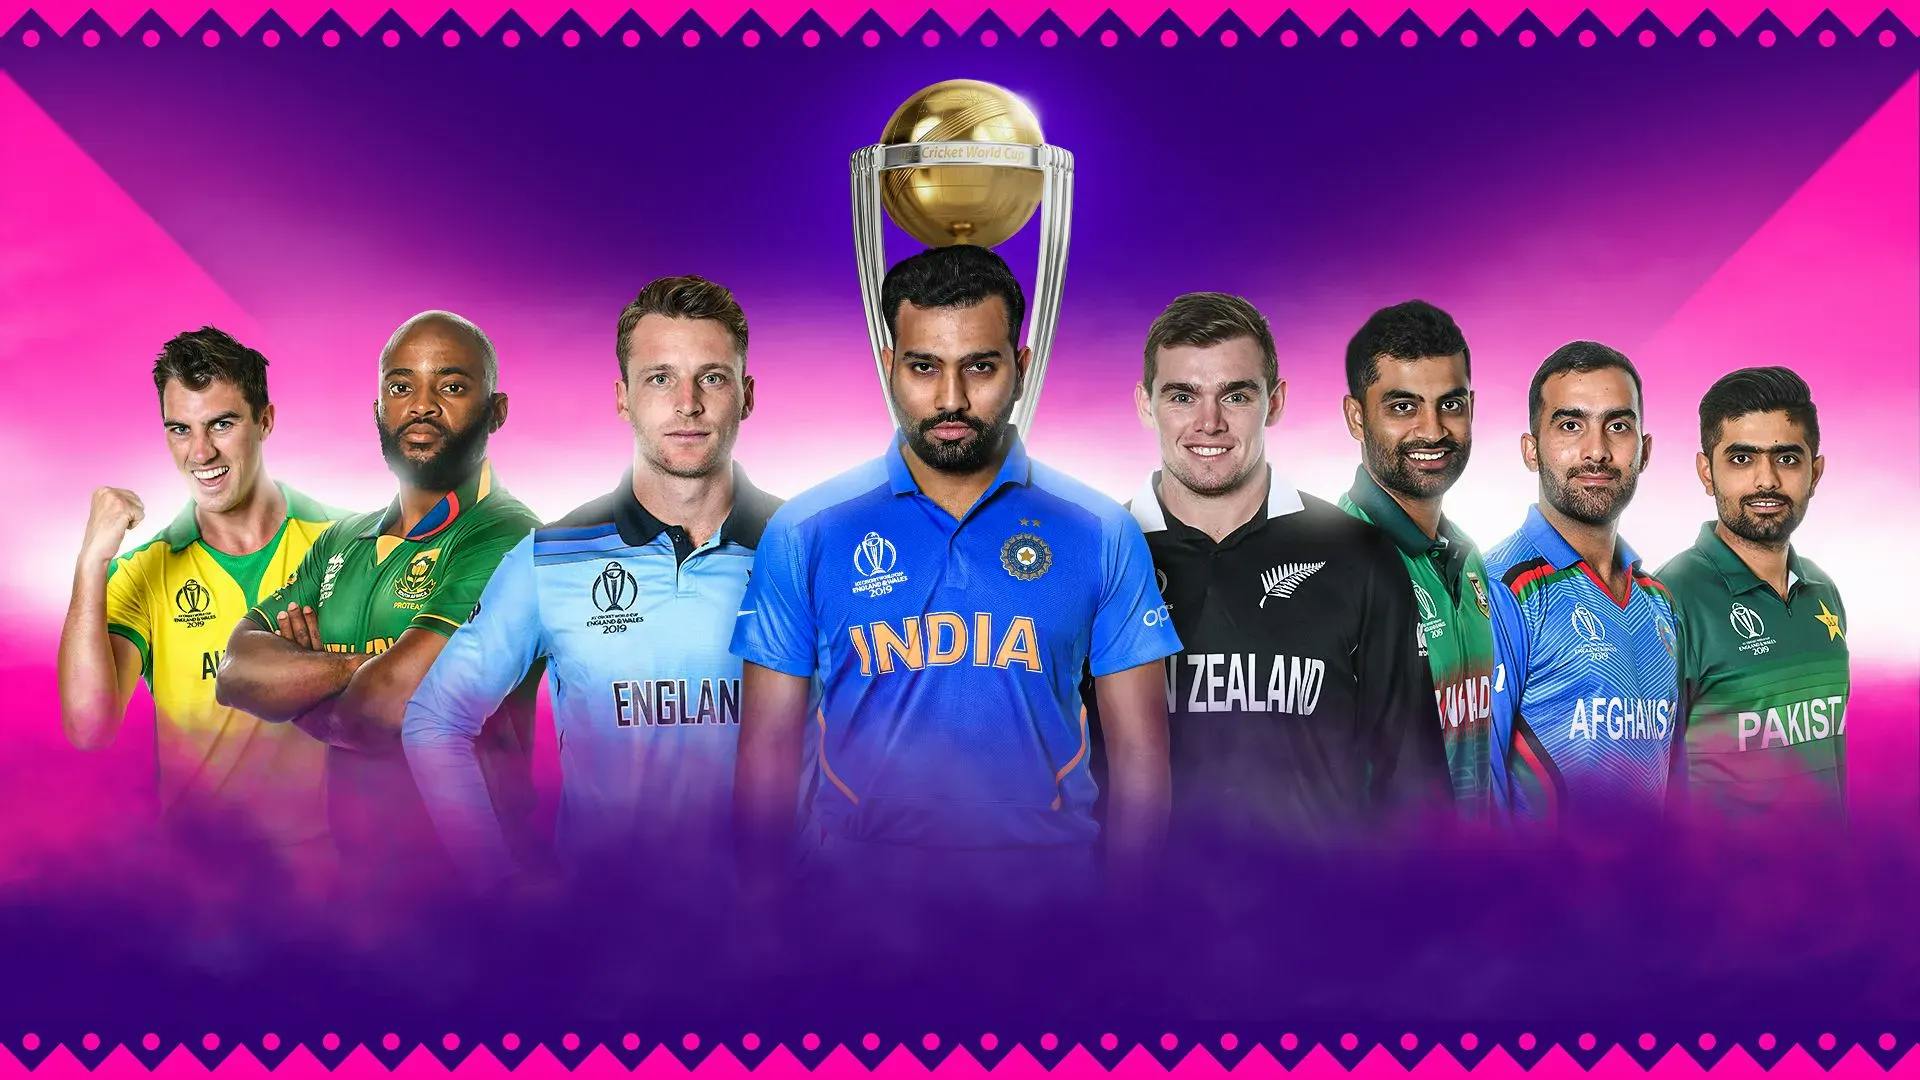 Cricket Fever: A Guide to the 2023 World Cup Host Cities in India